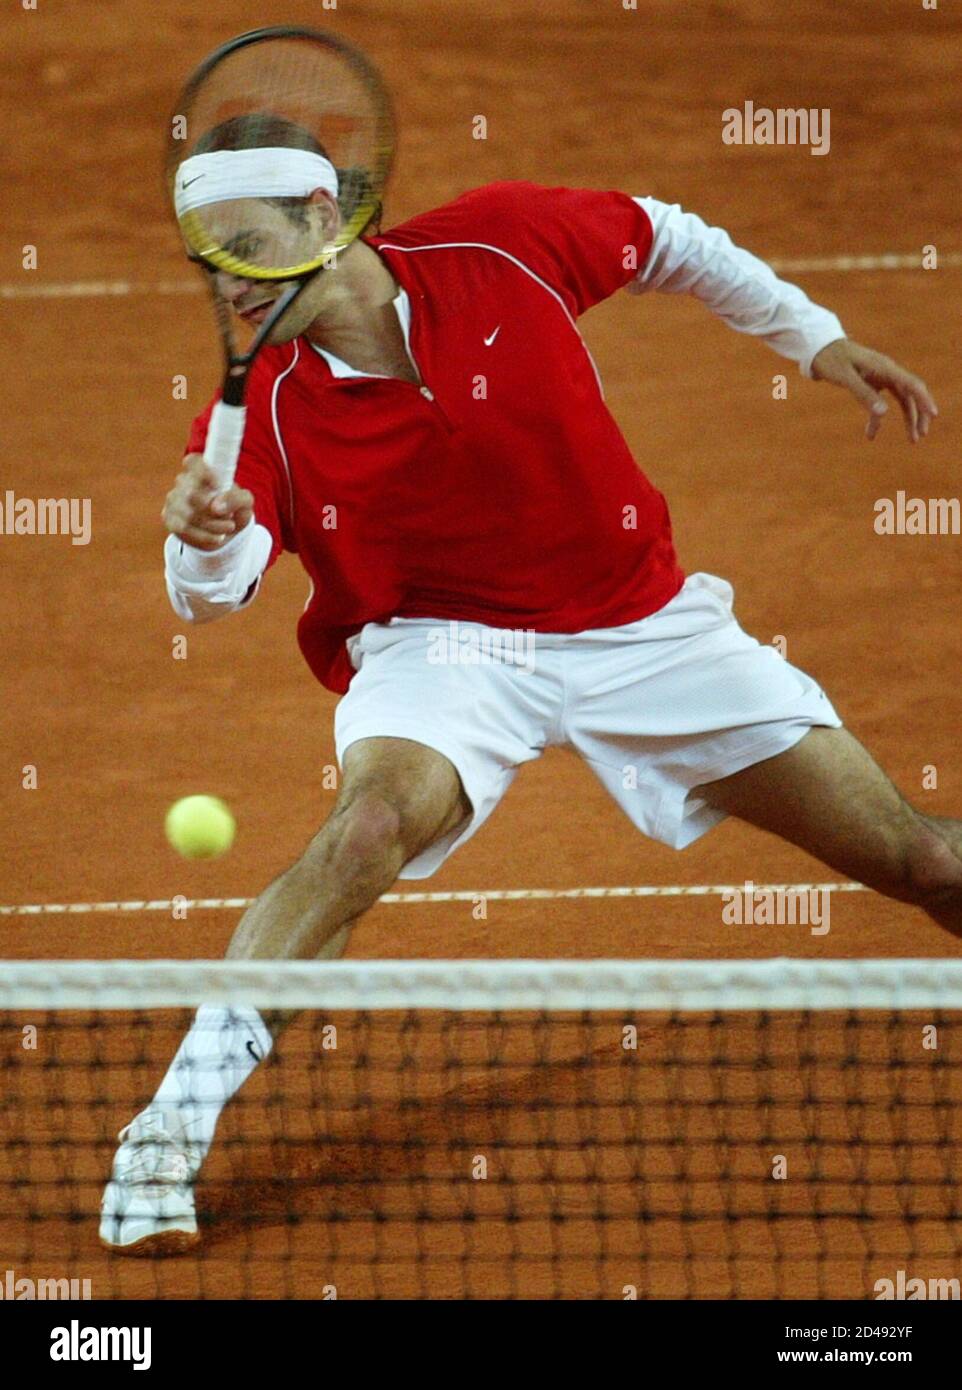 SWISS FEDERER SLIDES TO REACH A BALL DURING MATCH AGAINST GAUDIO FROM  ARGENTINA AT TENNIS MASTERS IN HAMBURG. Swiss Roger Federer slides to reach  a ball during his match against Gaston Gaudio